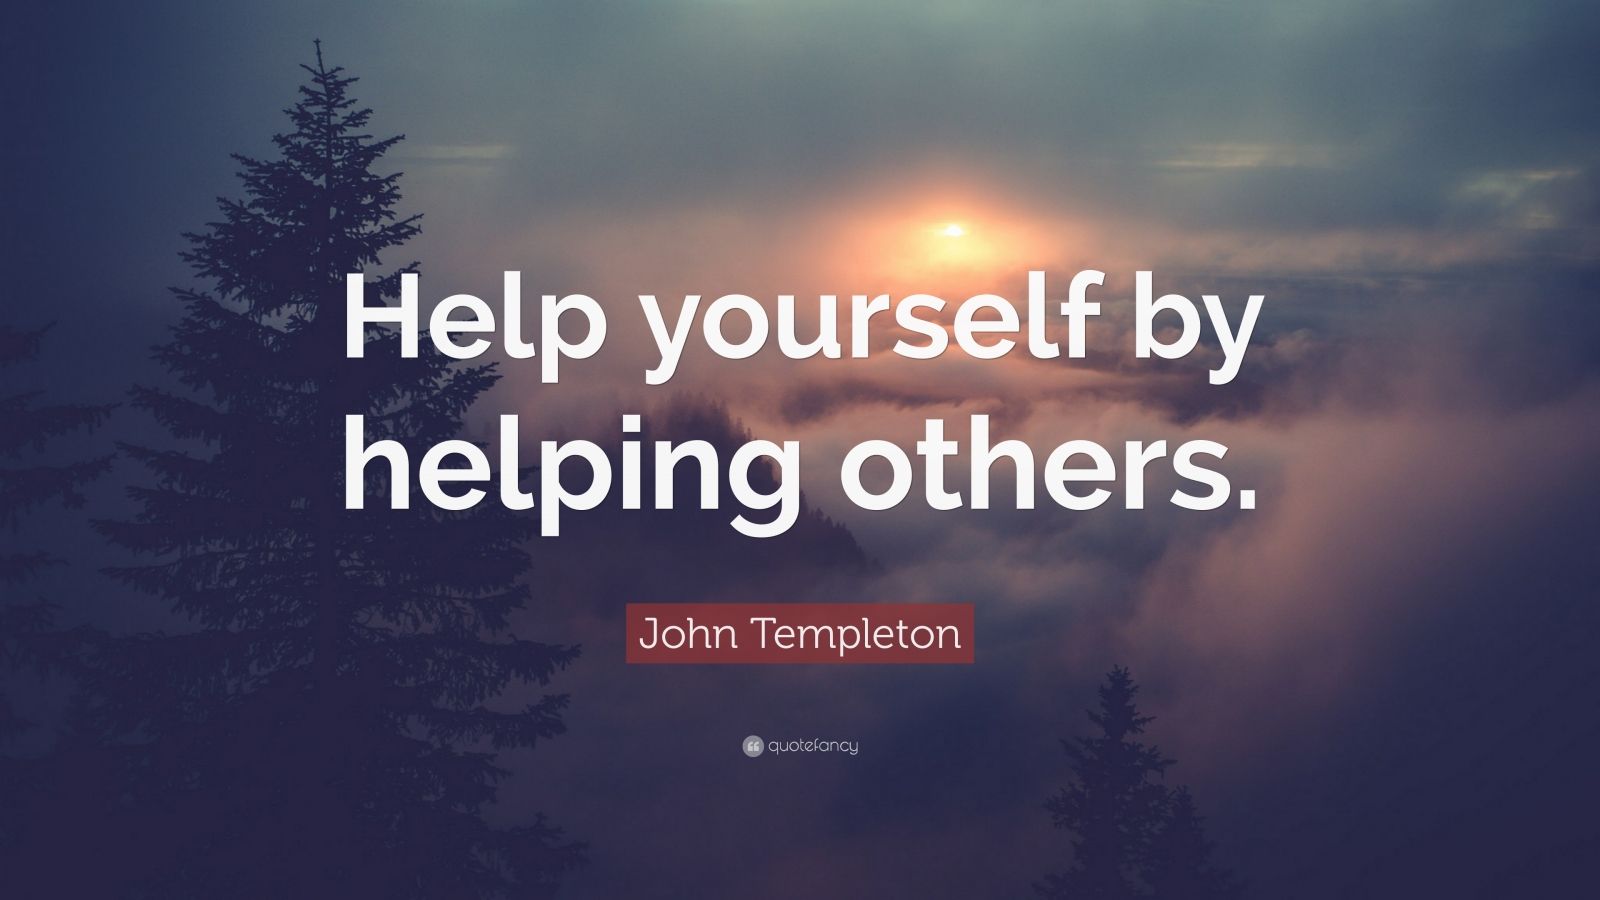 John Templeton Quote “Help yourself by helping others